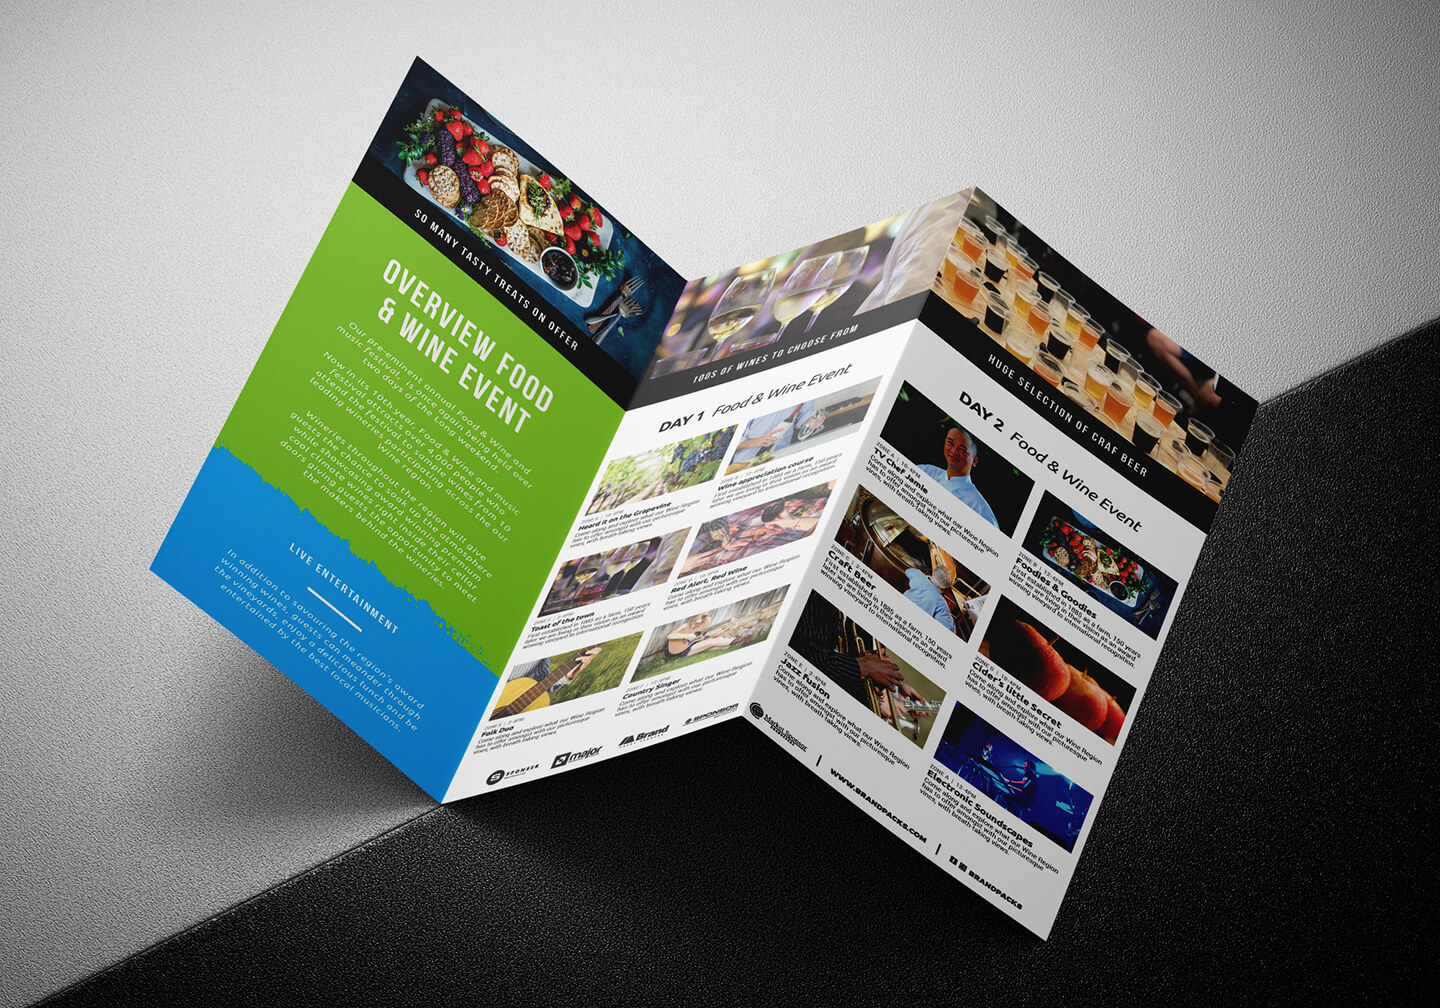 Free Tri Fold Brochure Template For Events & Festivals – Psd In Free Three Fold Brochure Template